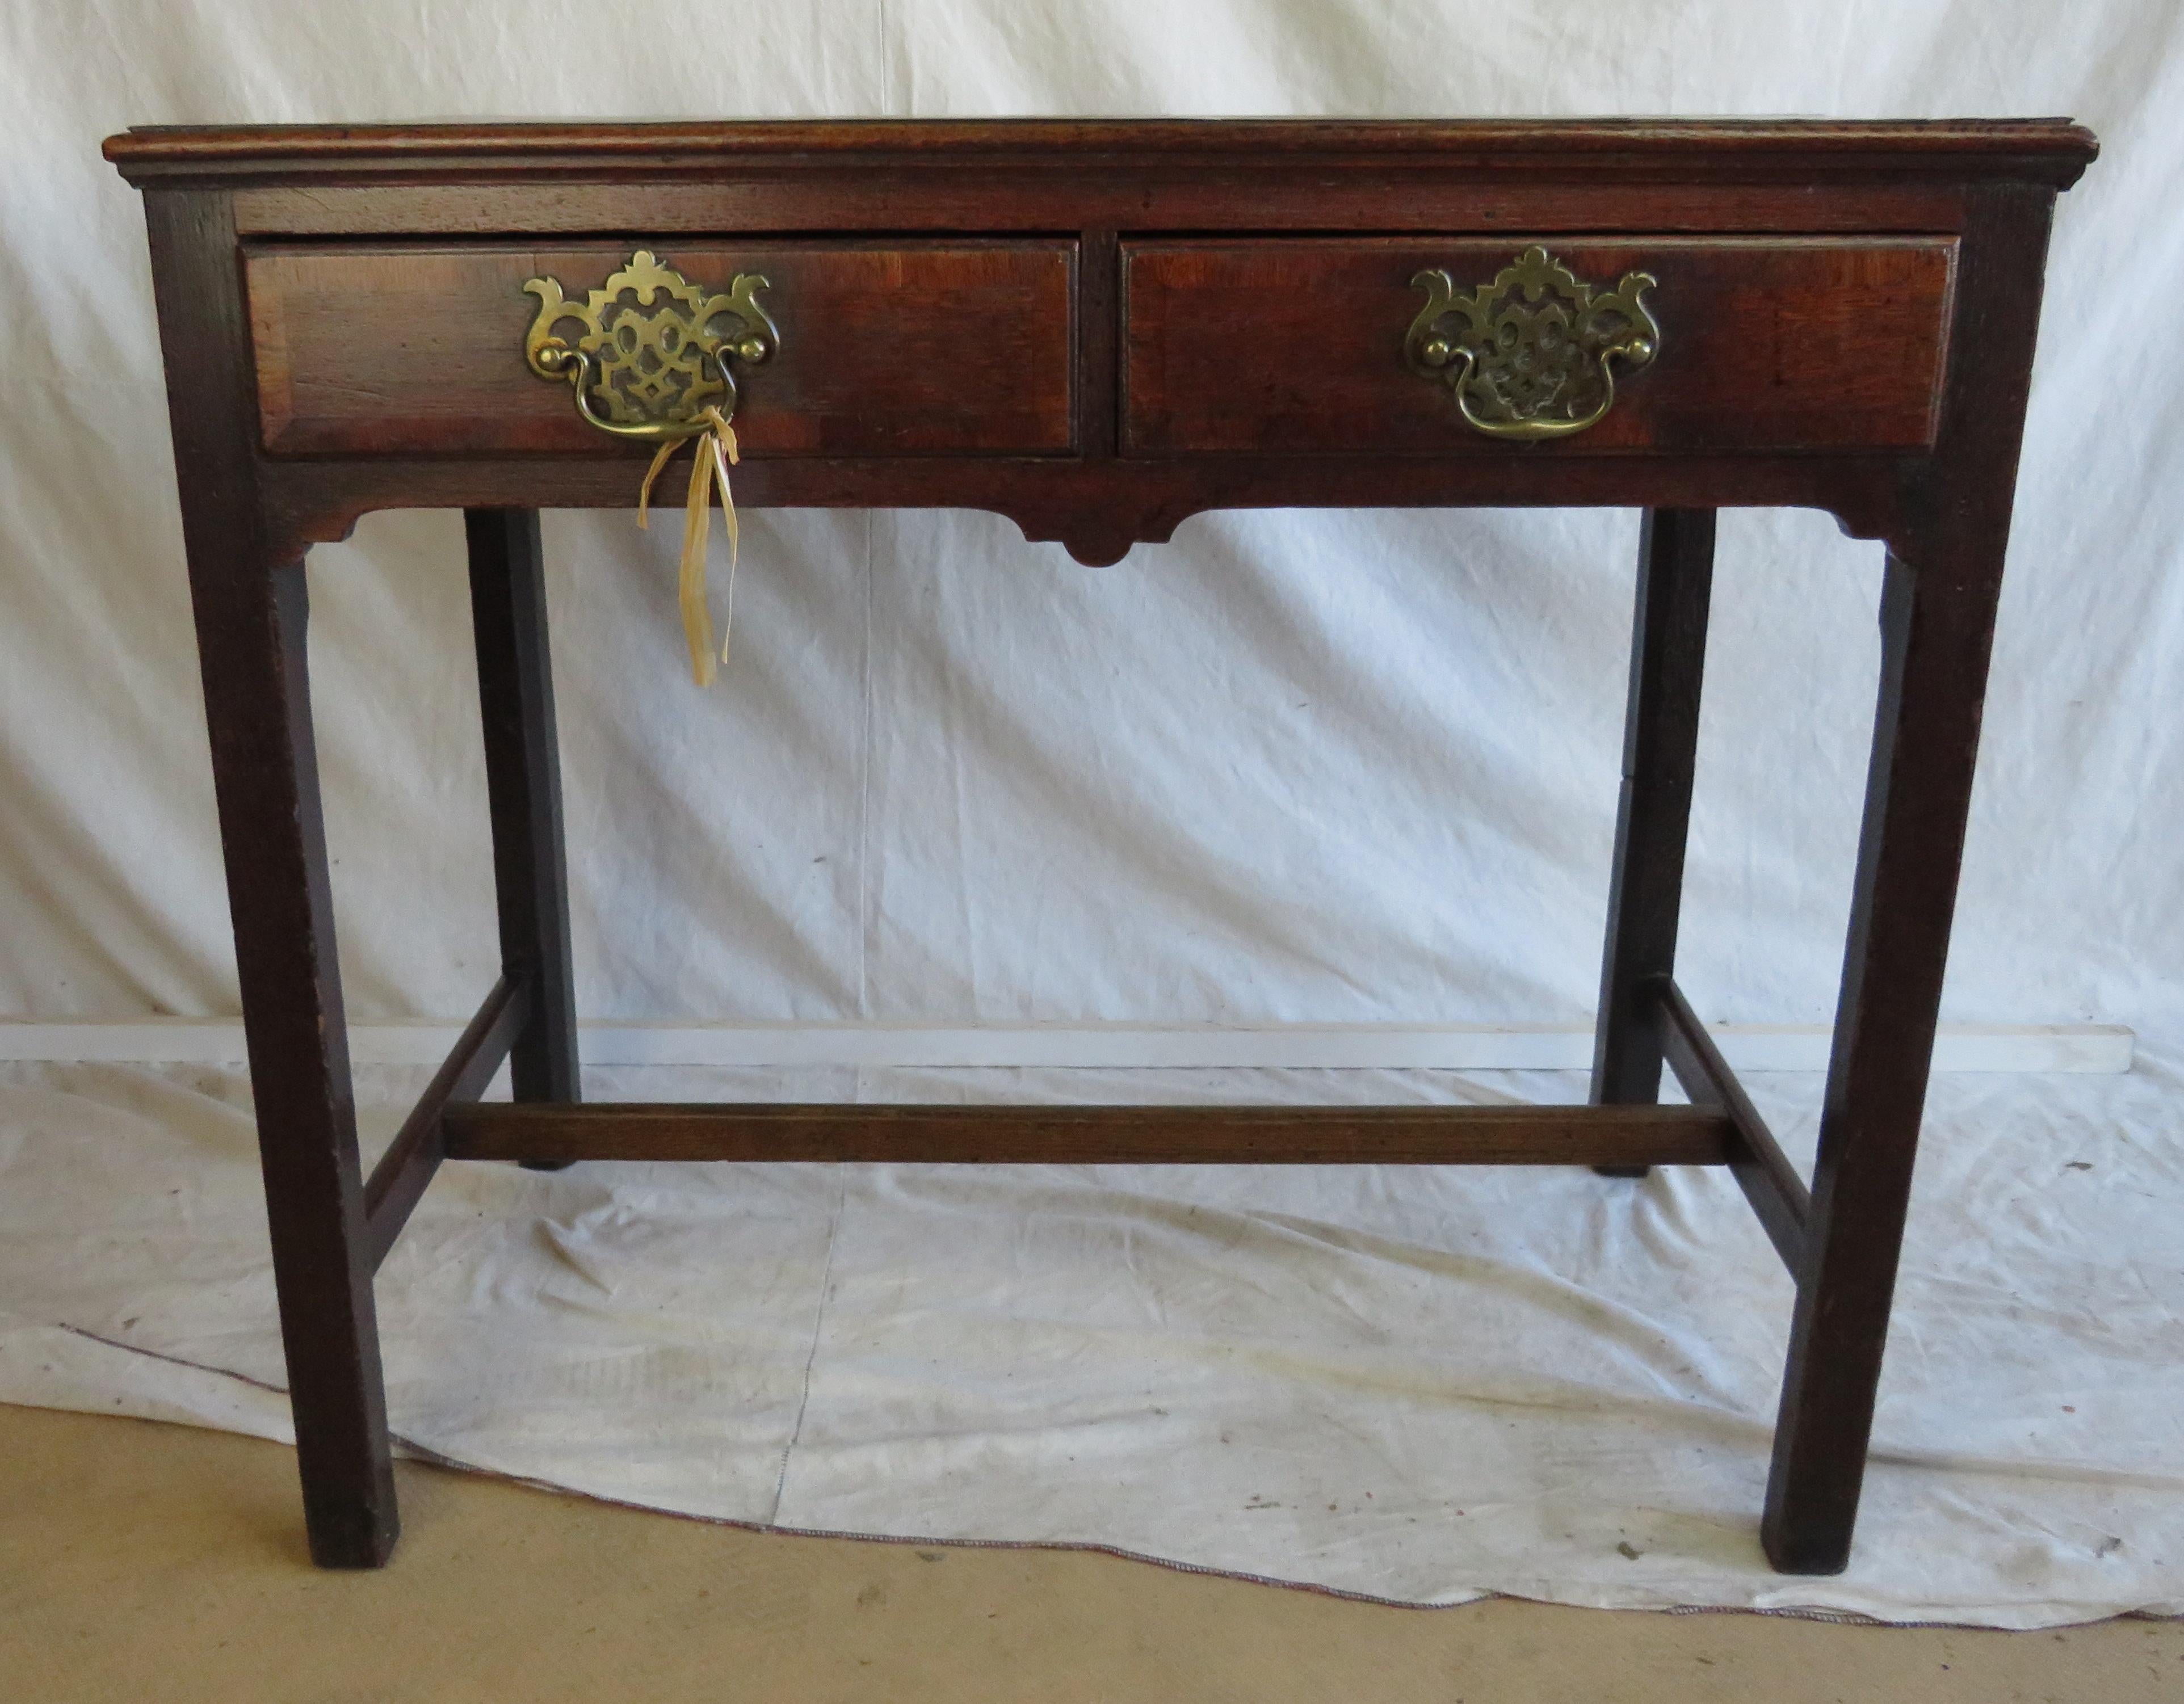 Late 18th century English oak two drawer side table with two side-by-side drawers, each with single brass Chippendale drawer pull, H-stretcher base.